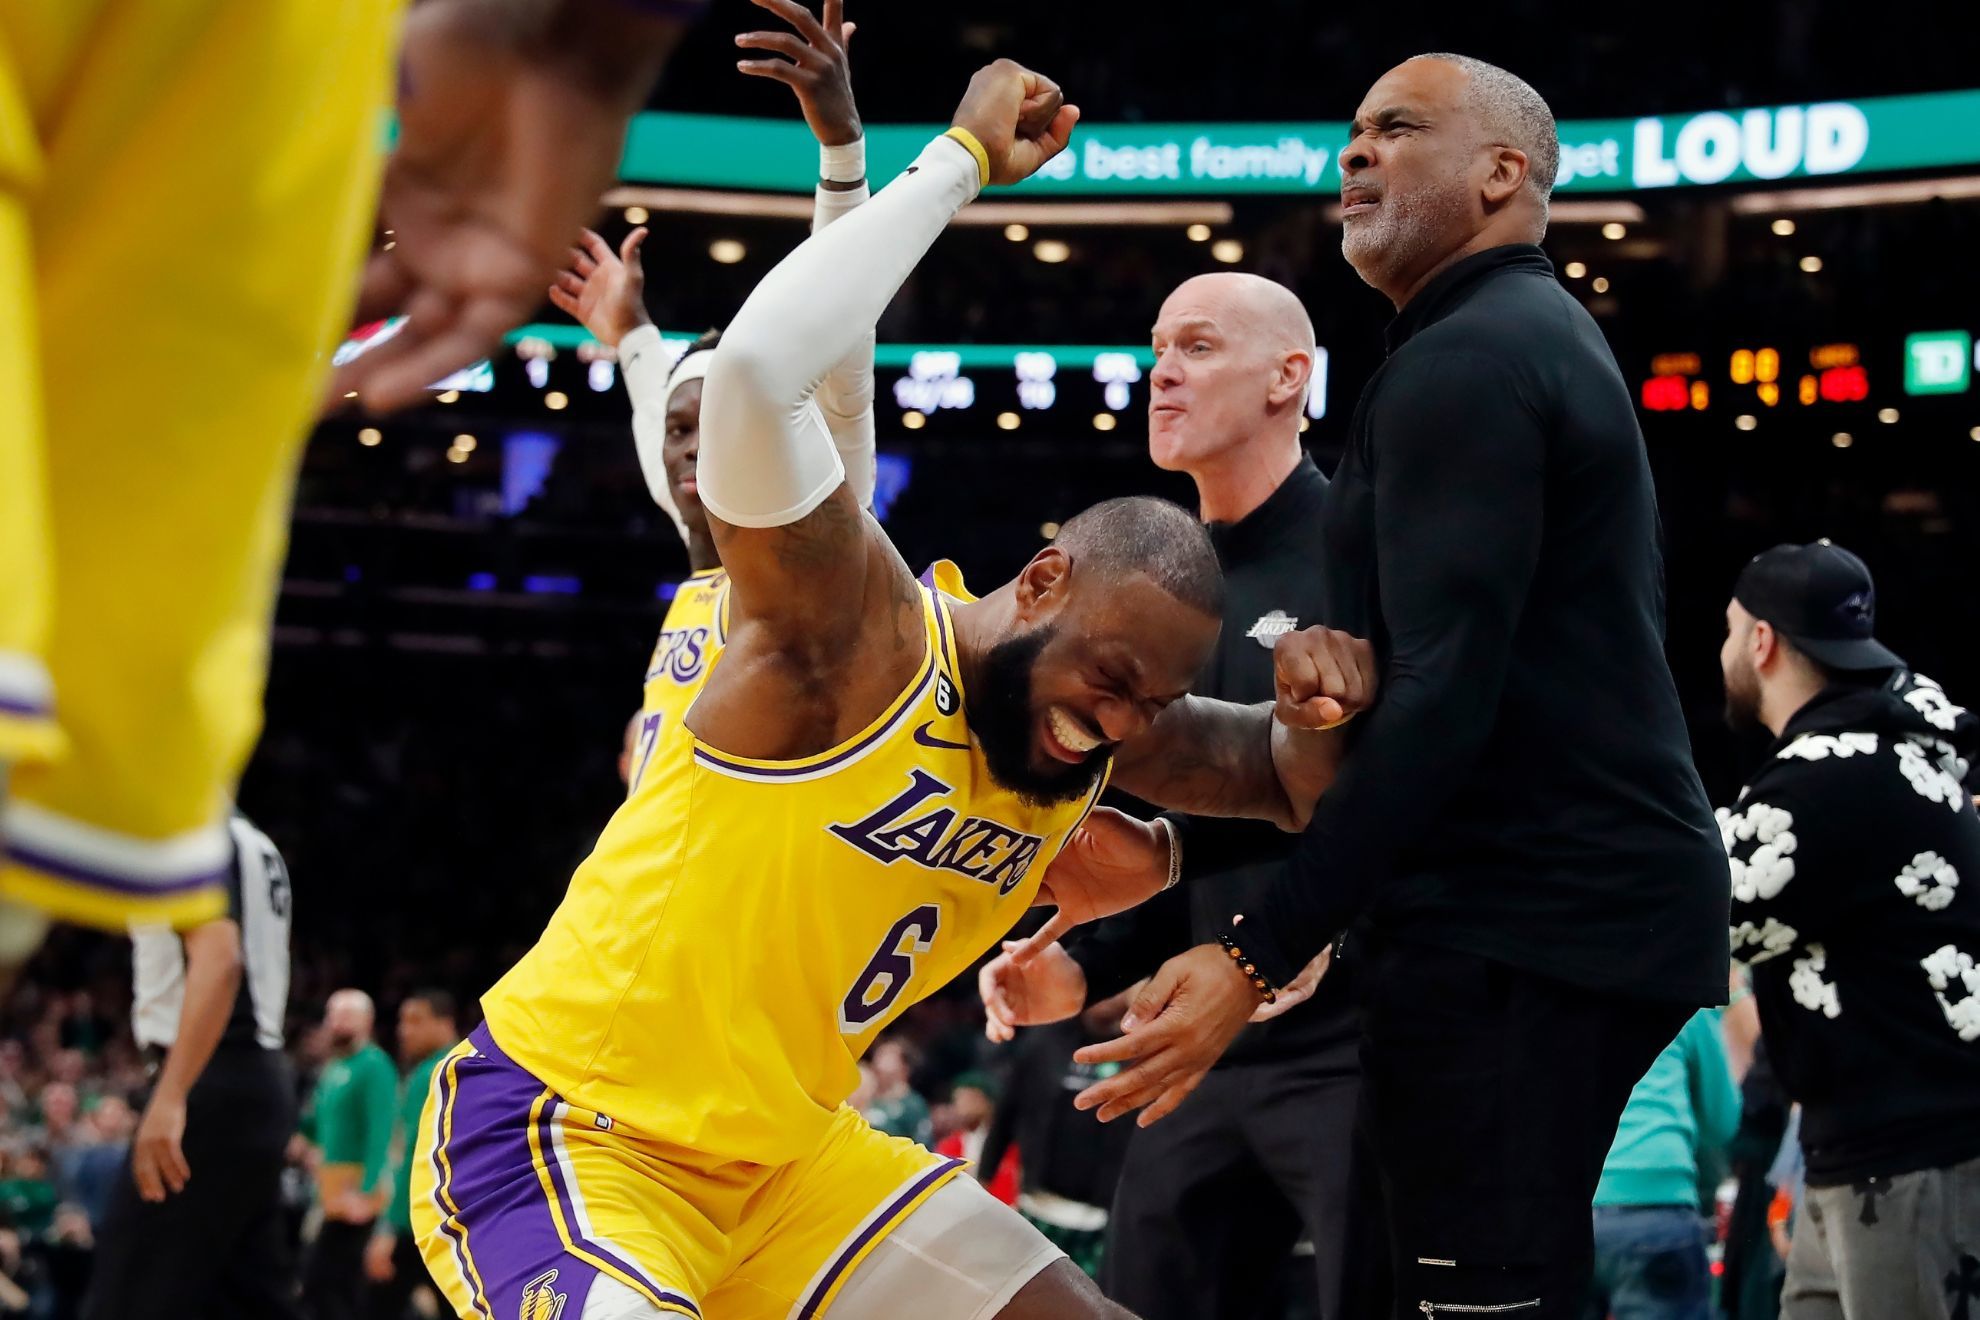 Lakers superstar LeBron James was beside himself after the no-call